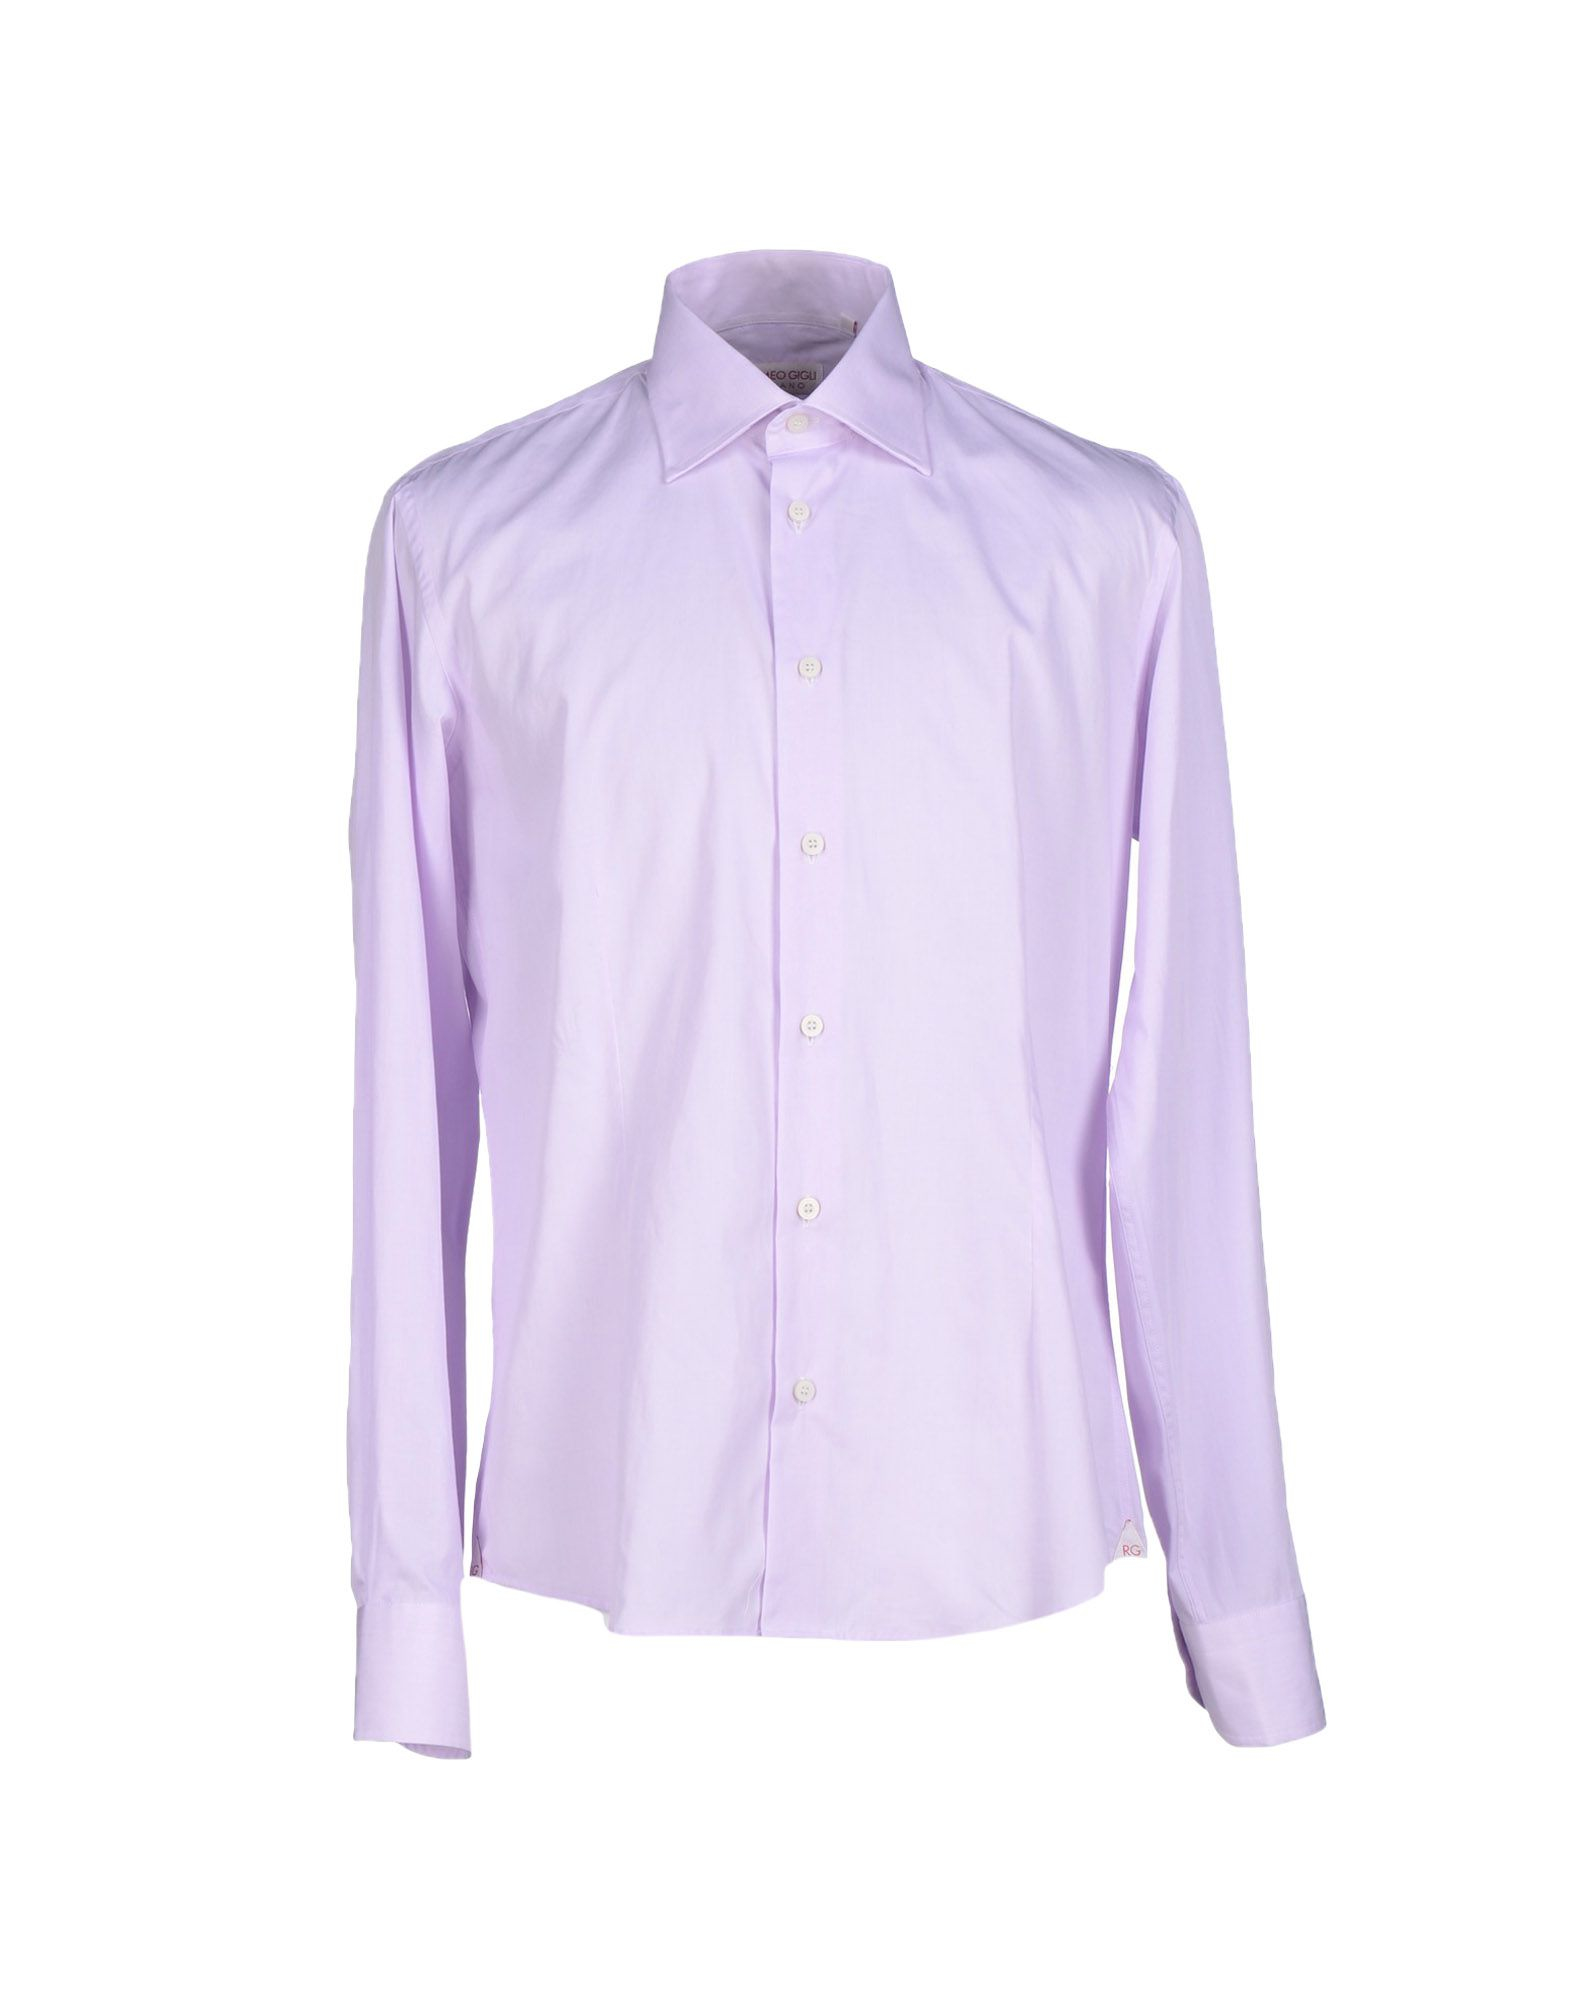 Lyst - Romeo gigli Shirt in Pink for Men